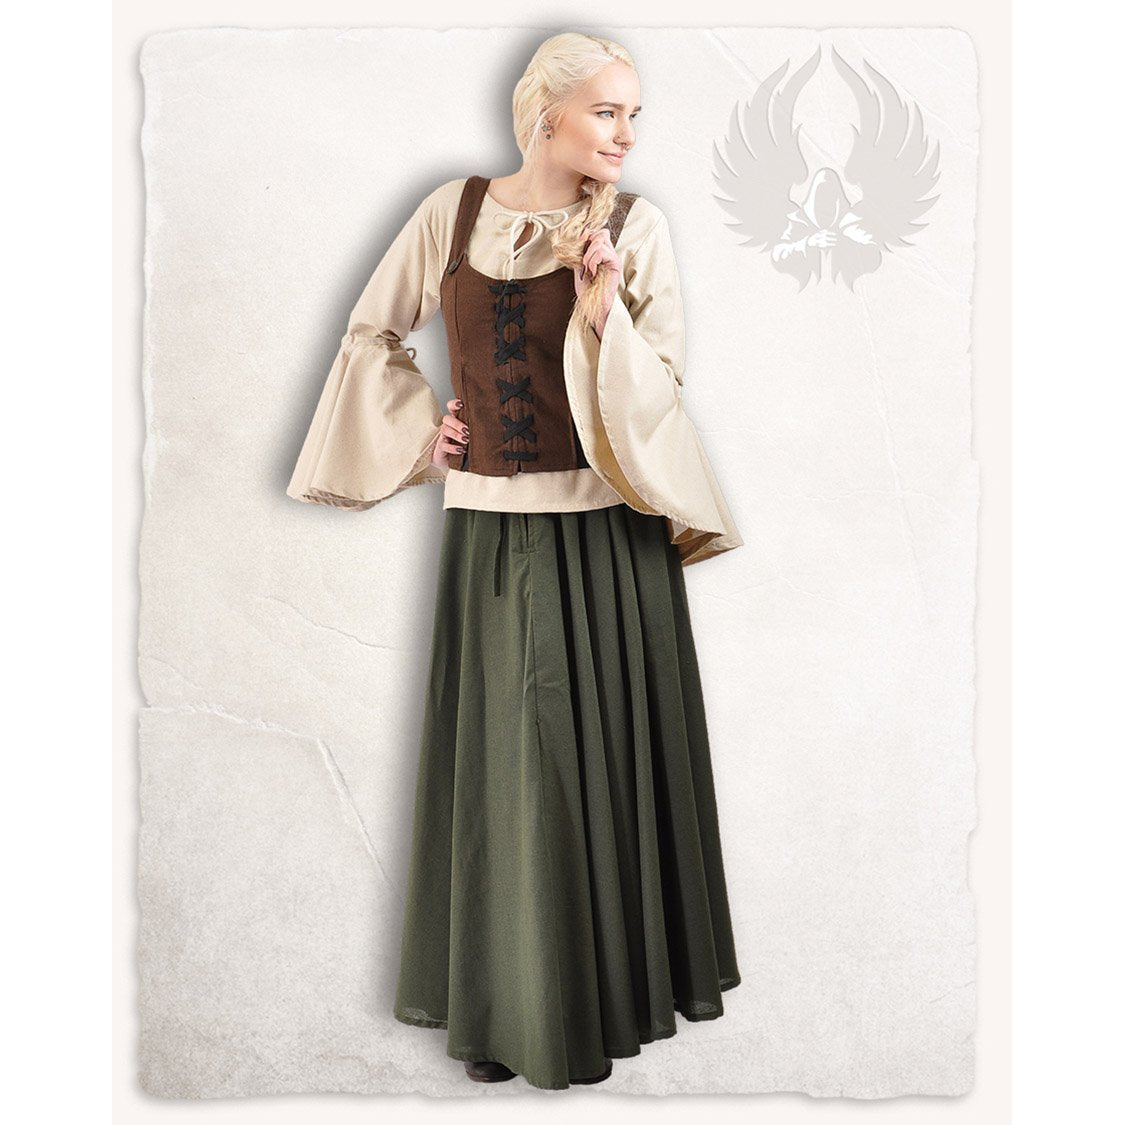 Alexandrine Bustier Medieval Clothing Blouse Steam Punk Shirt for LARP,  Victorian Costume and Cosplay -  Denmark